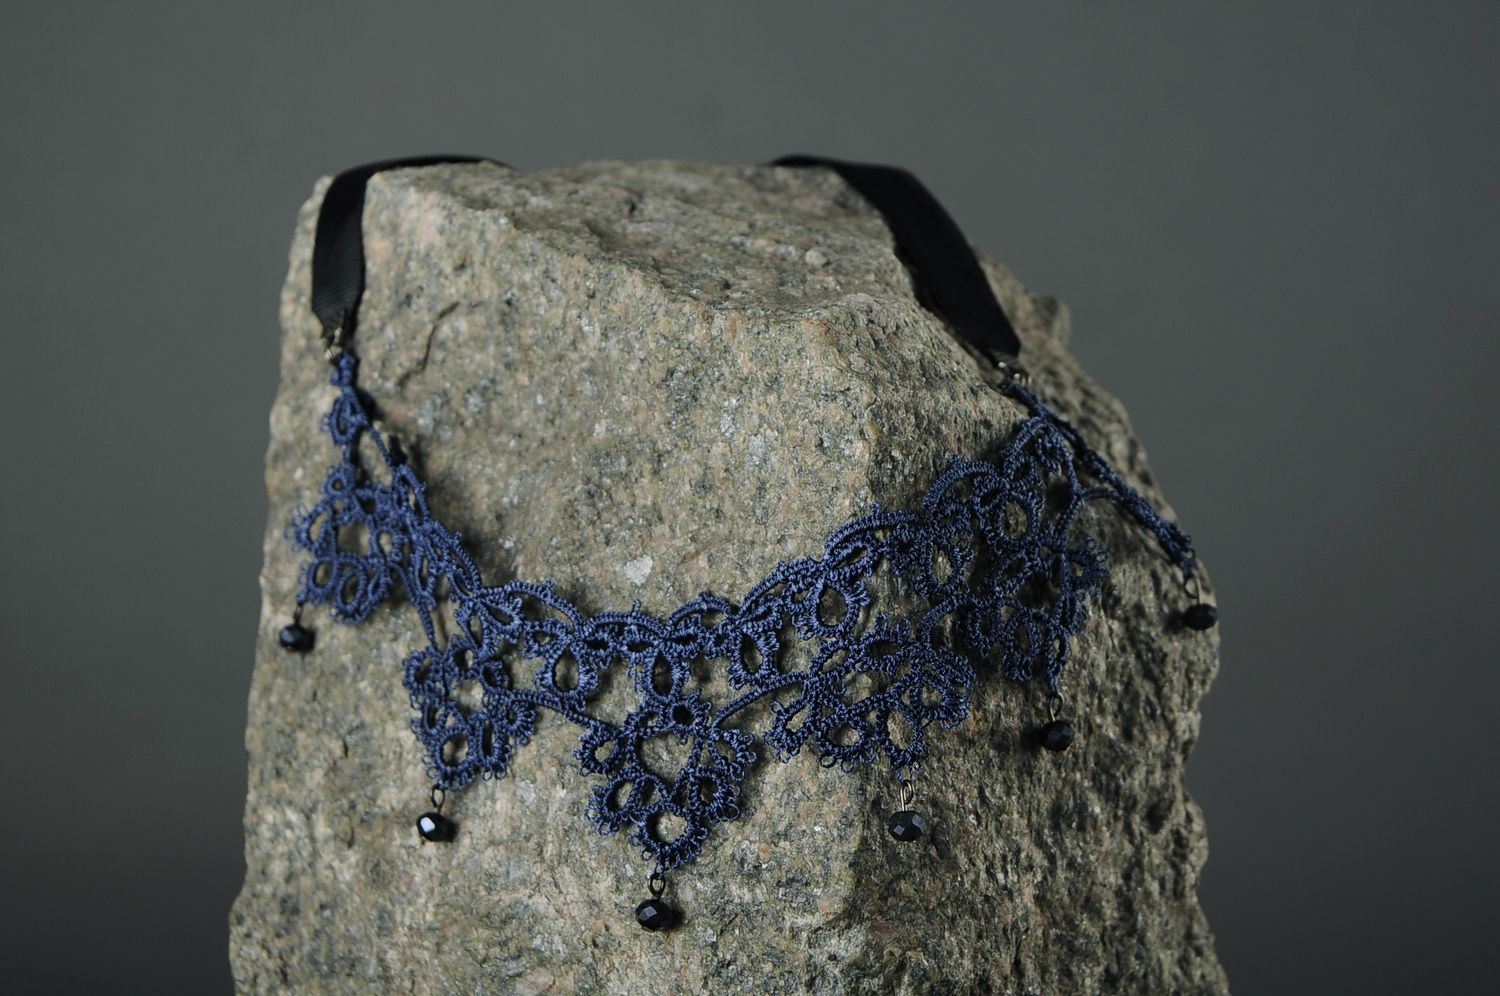 Crocheted necklace photo 3